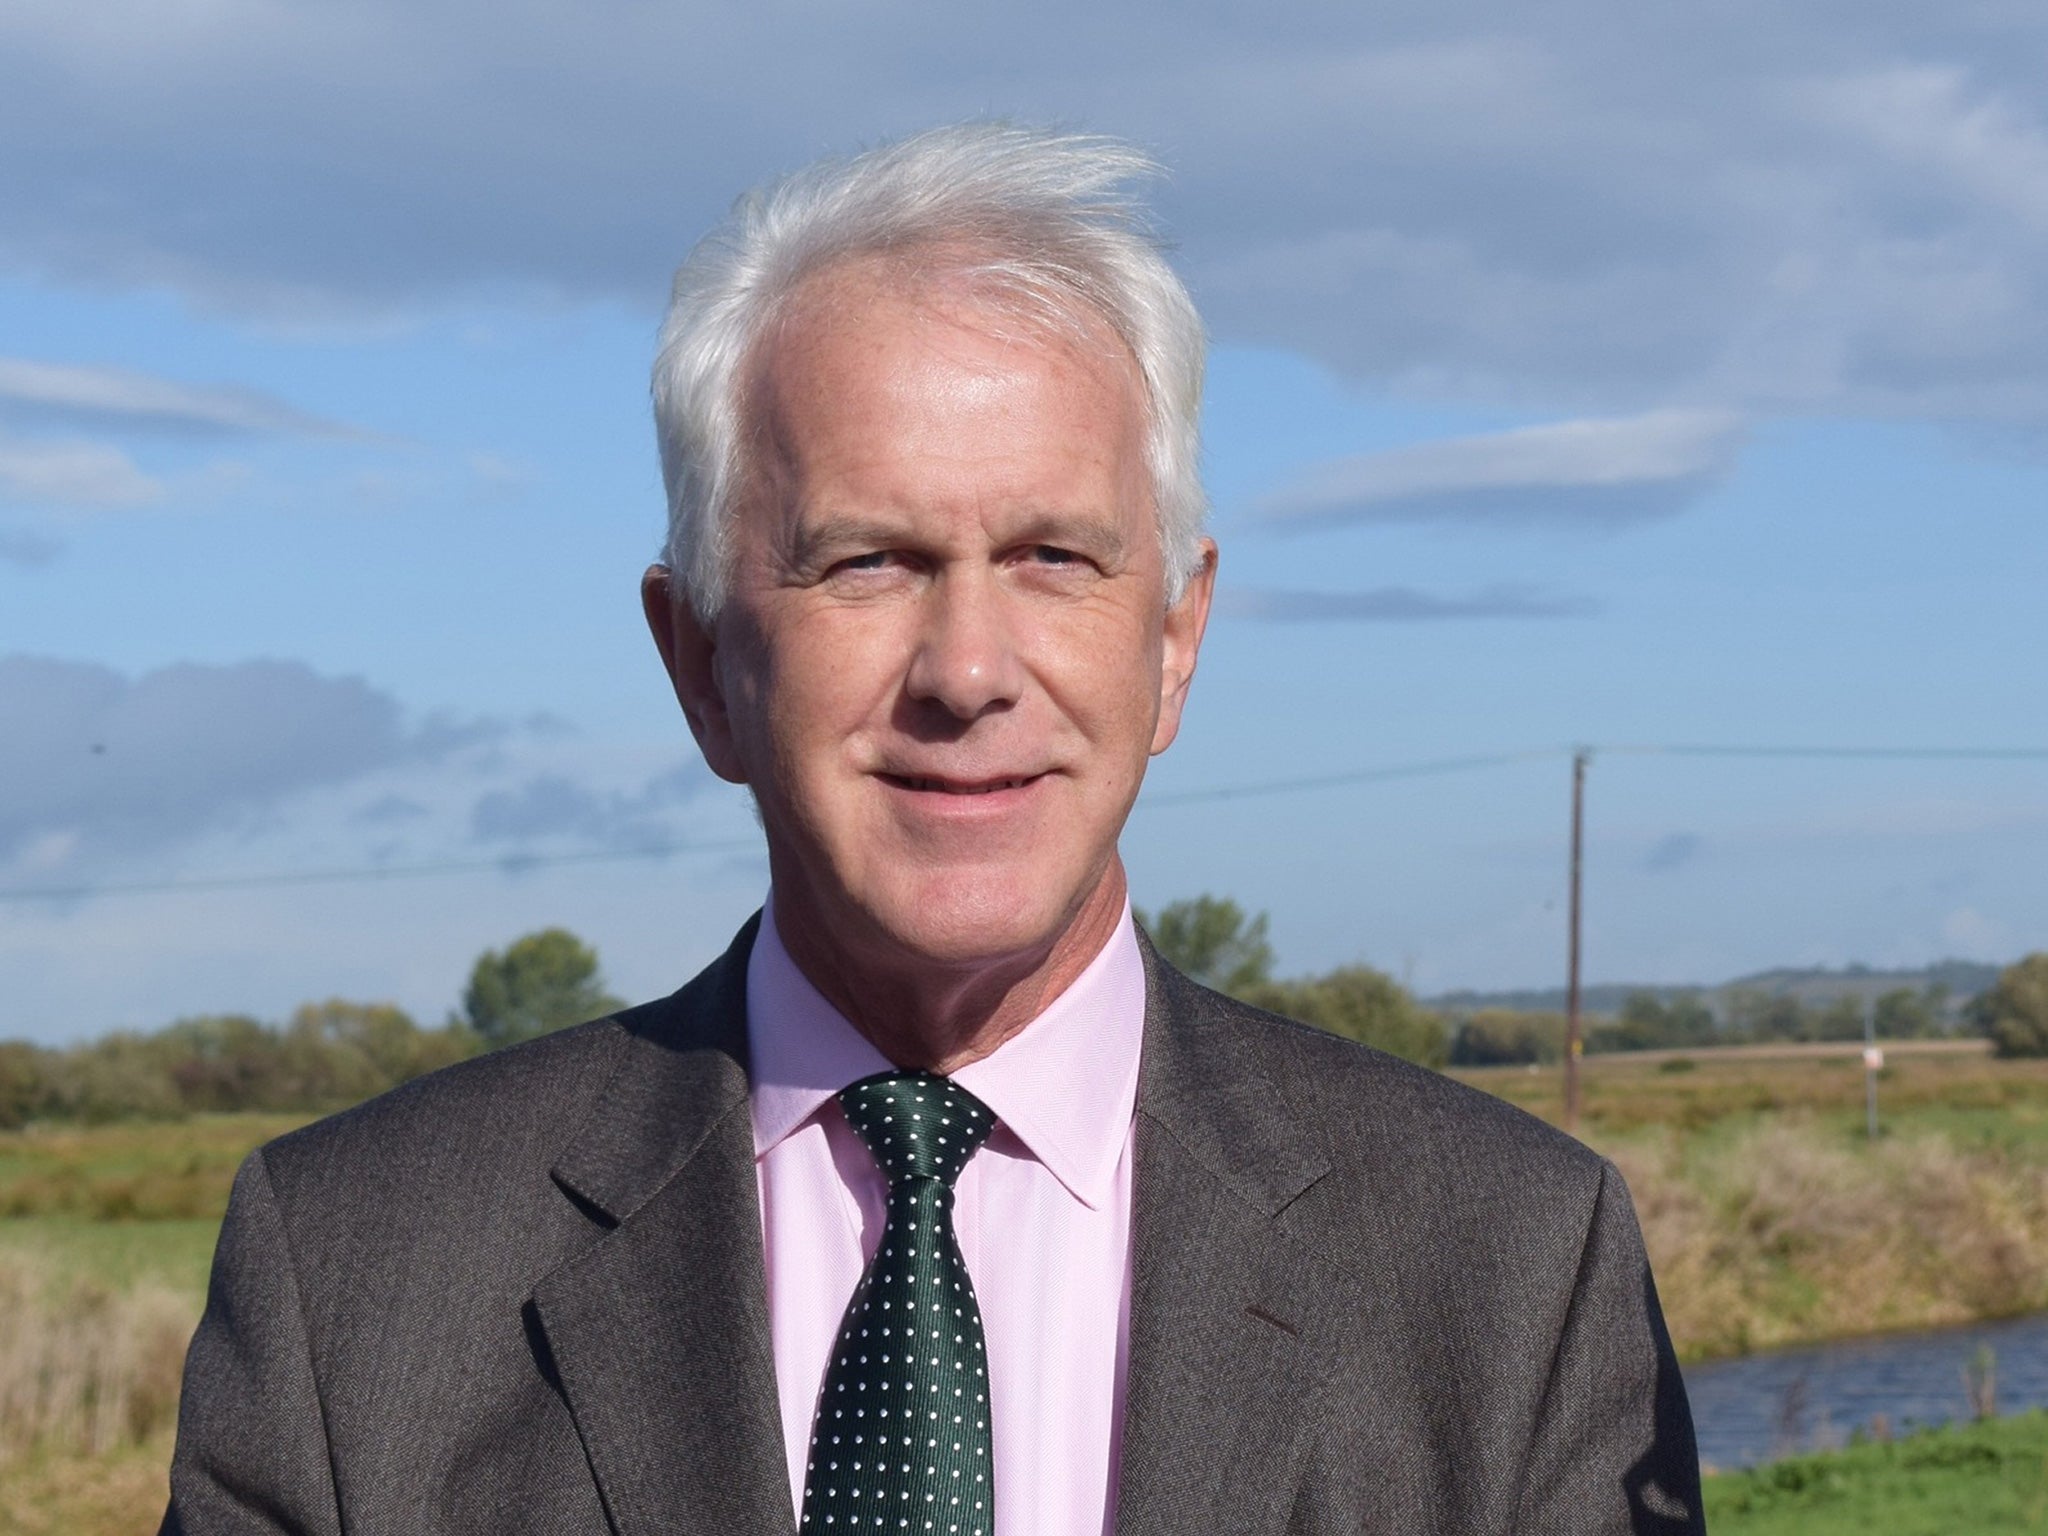 Sir Philip Dilley, the chairman of the Environment Agency, who is returning to the UK after facing criticism for being on holiday in Barbados while the country battles some of the worst floods it has experienced in decades